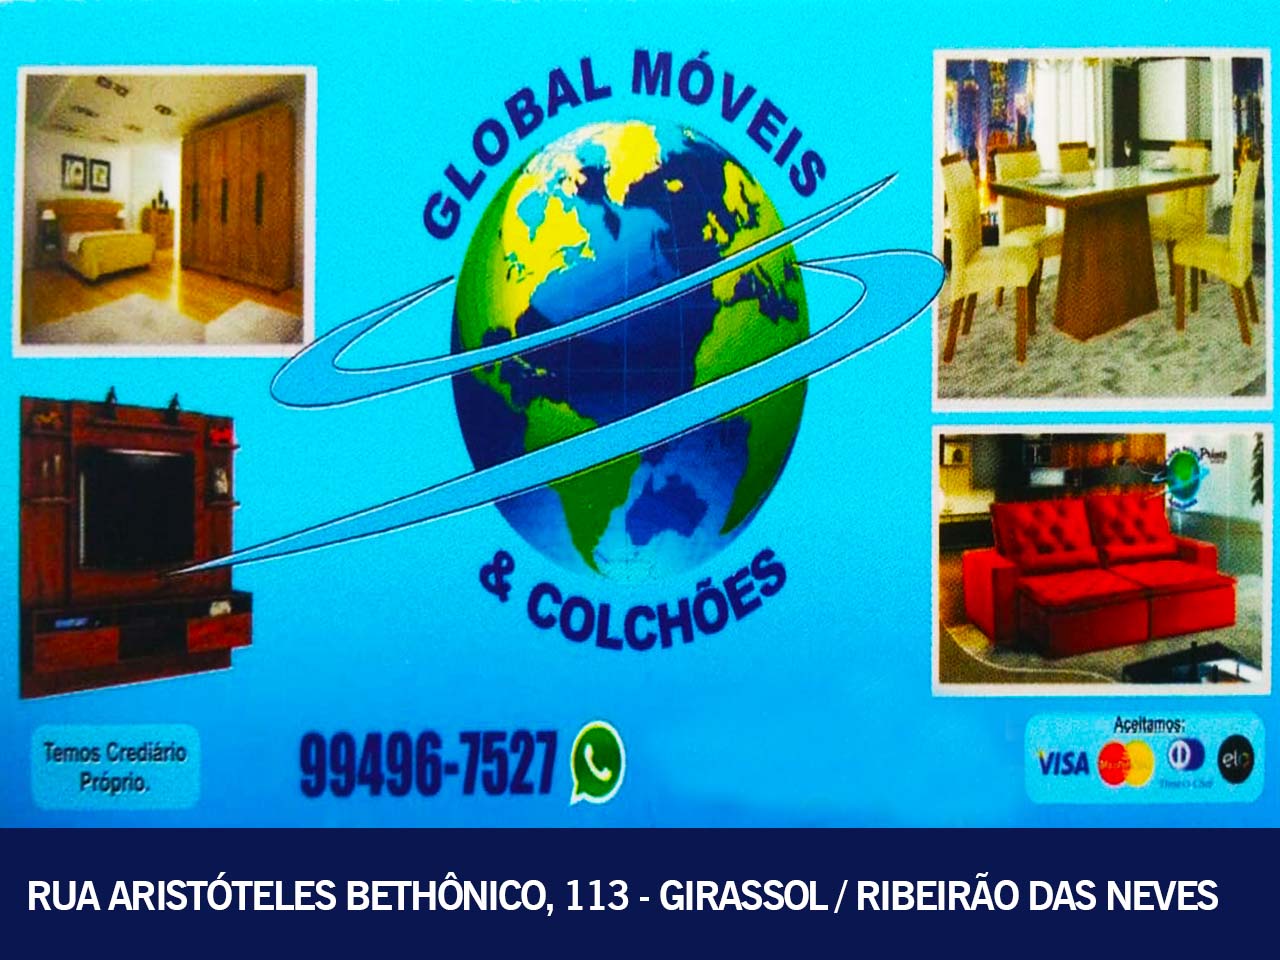 GLOBAL MOVEIS & COLCHOES